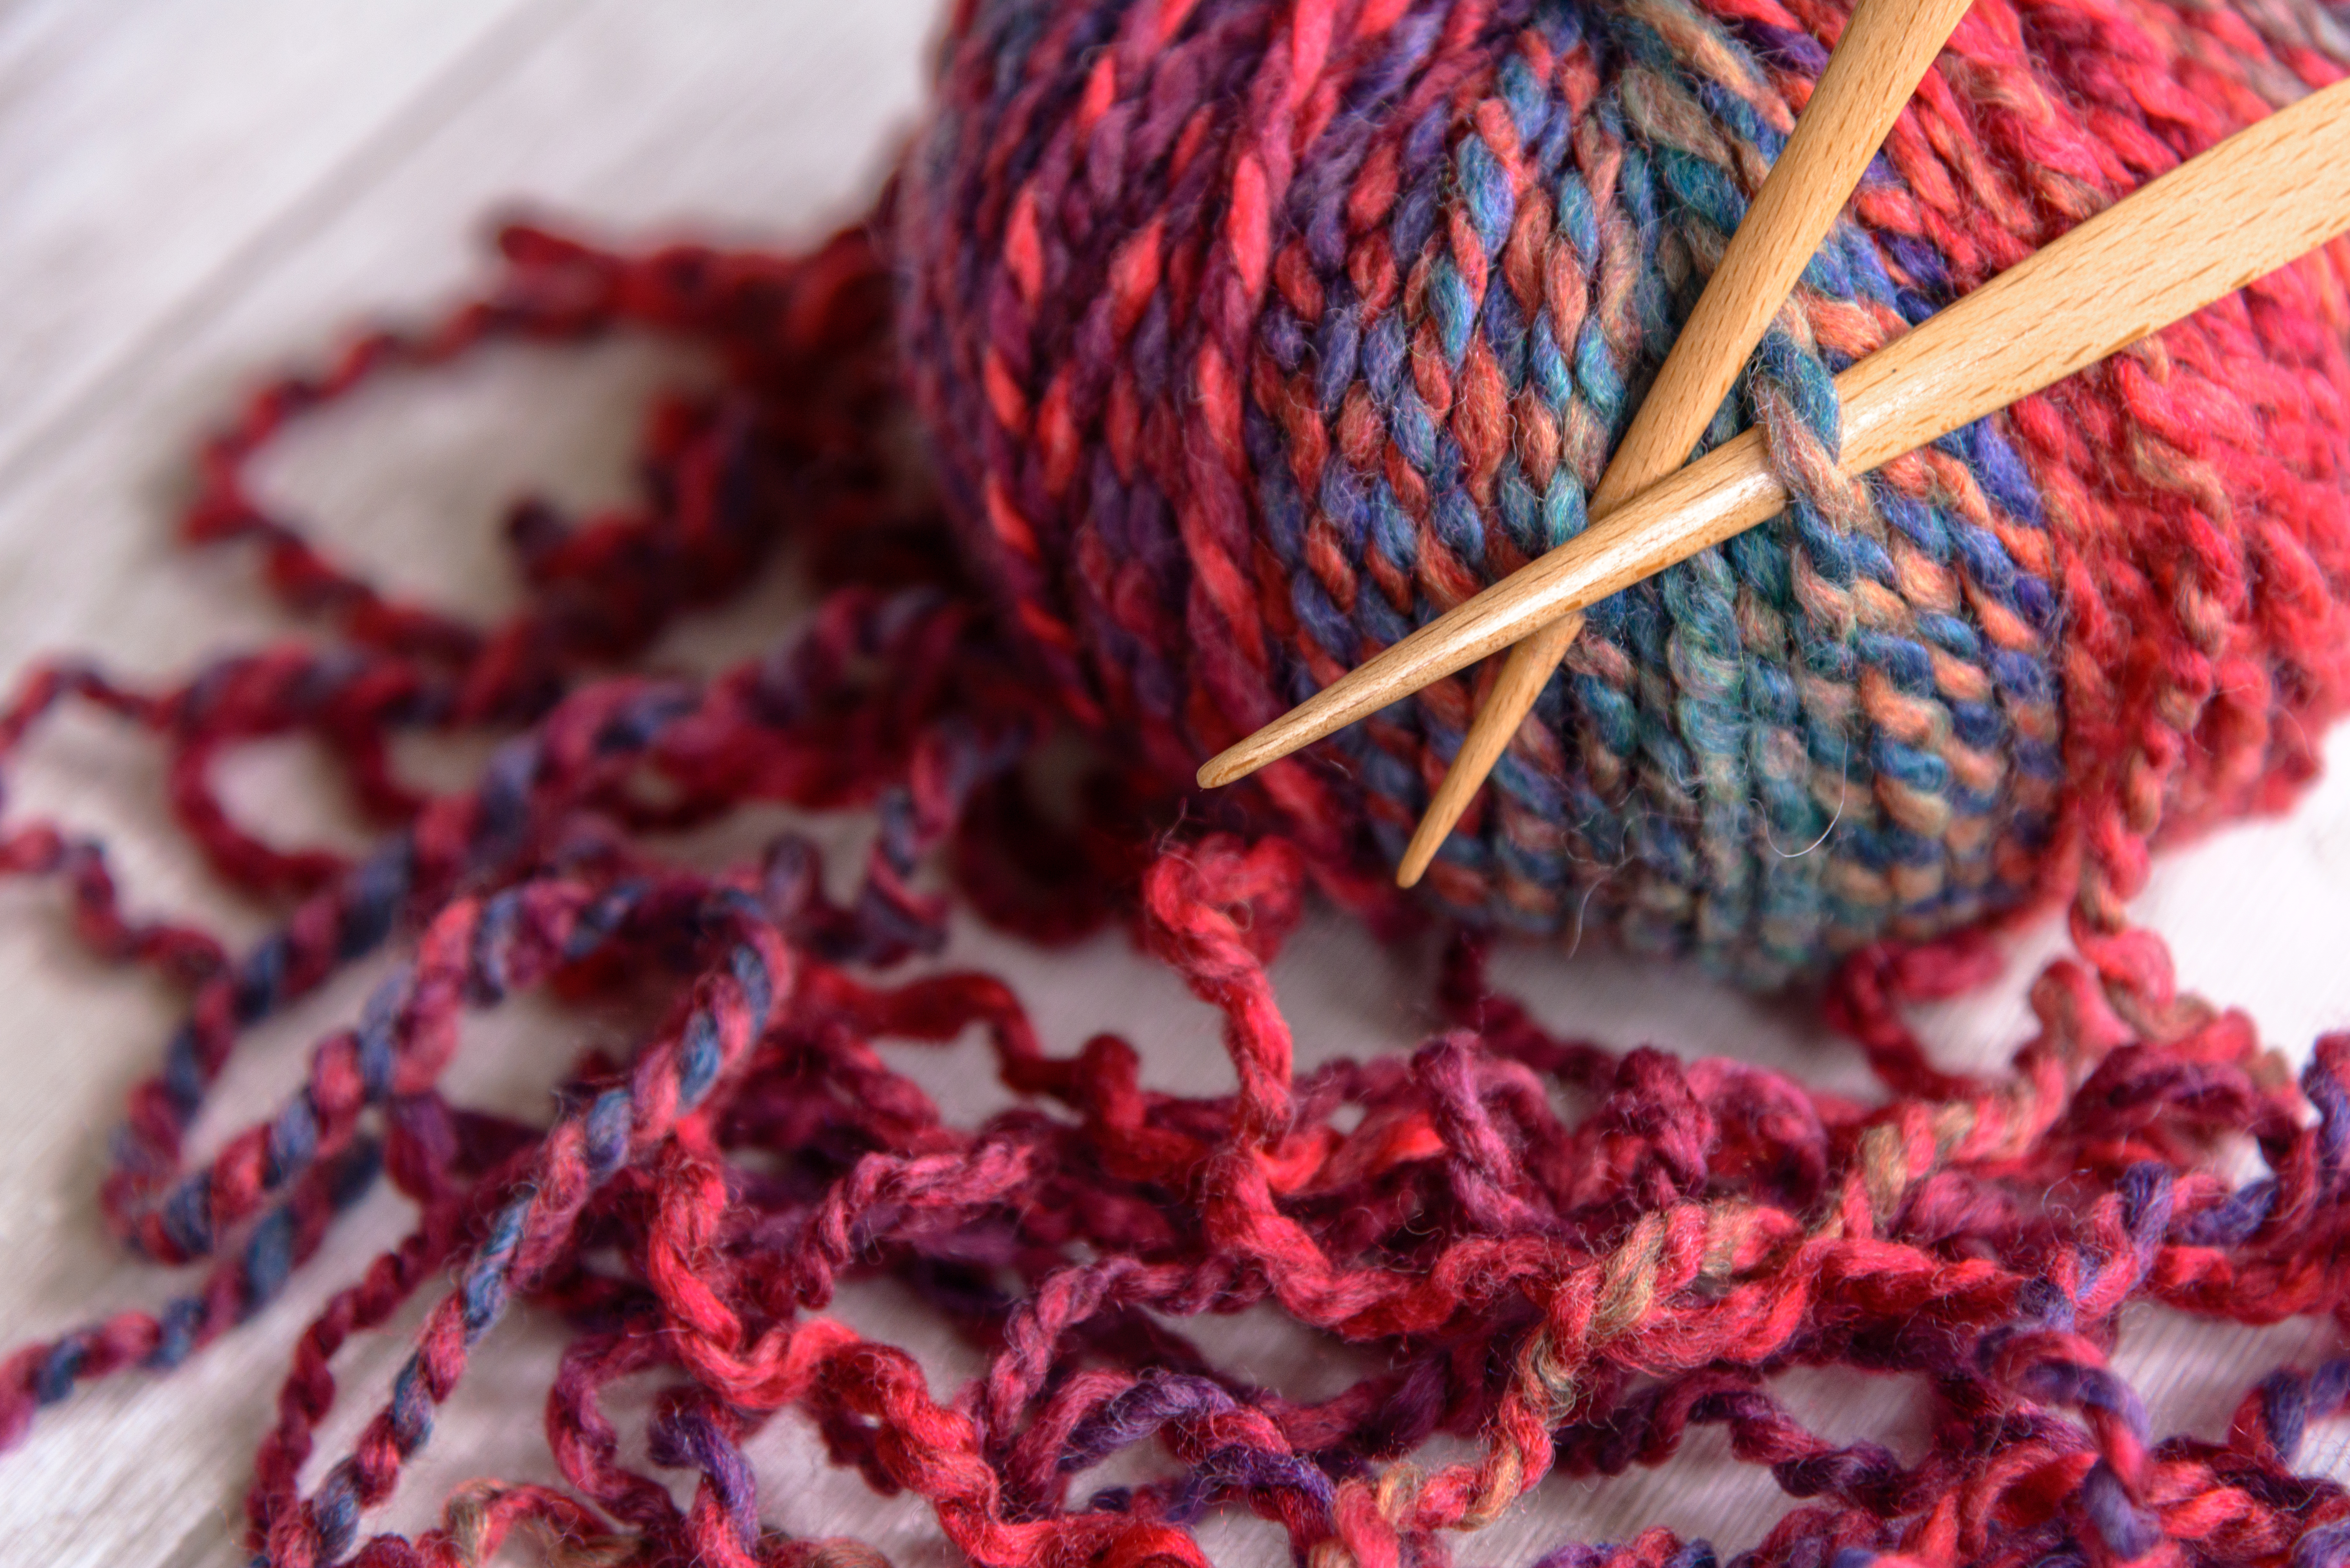 Ravelry Patterns Knitting This Knitting Group Just Banned Posts Supporting Trump Time